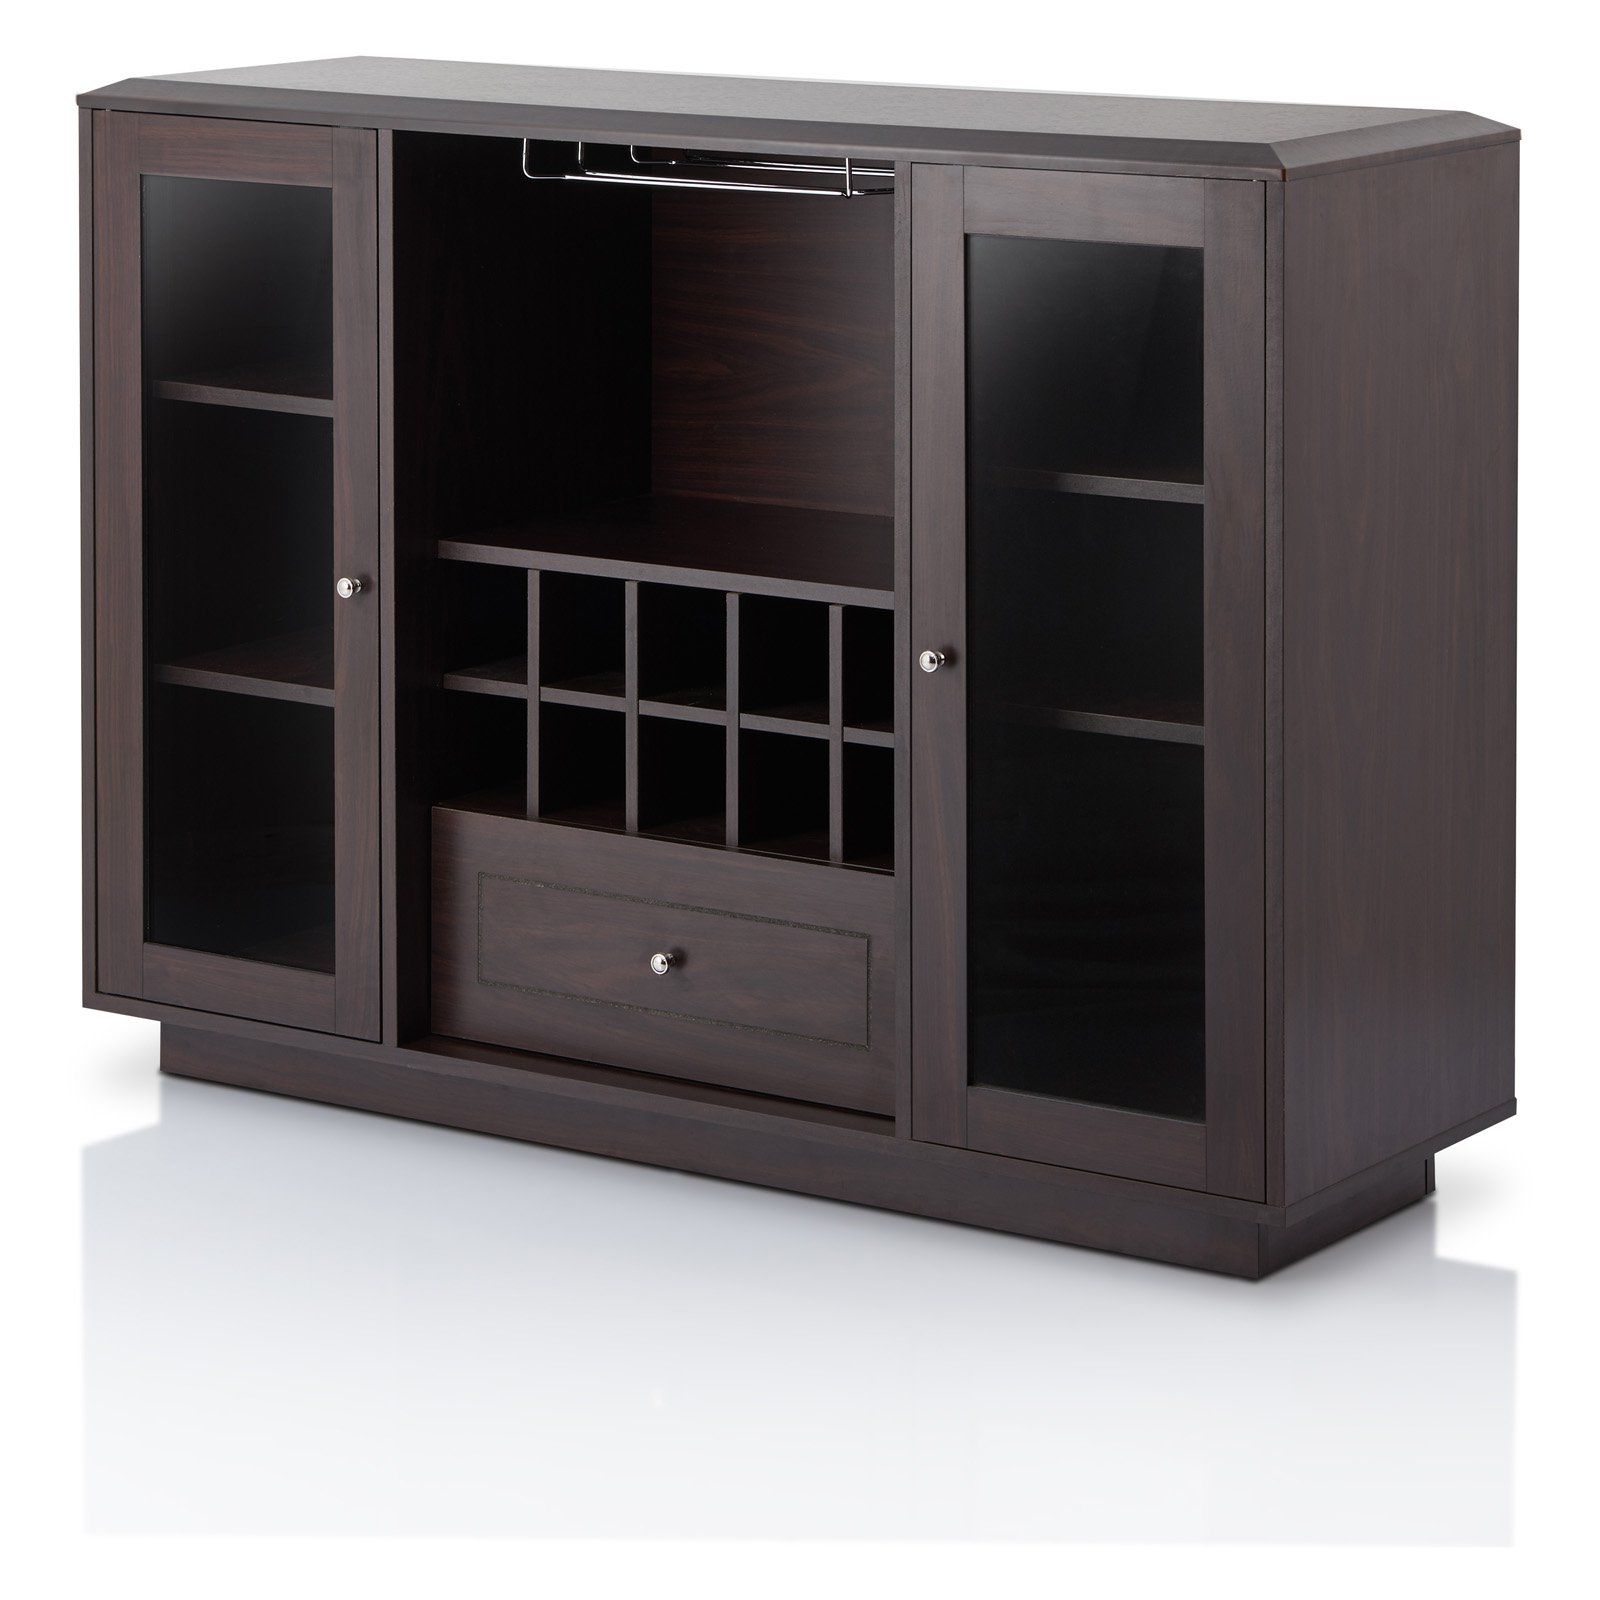 Furniture Of America Kenna Espresso Contemporary Multi With Regard To Modern Cappuccino Open Storage Dining Buffets (View 10 of 20)